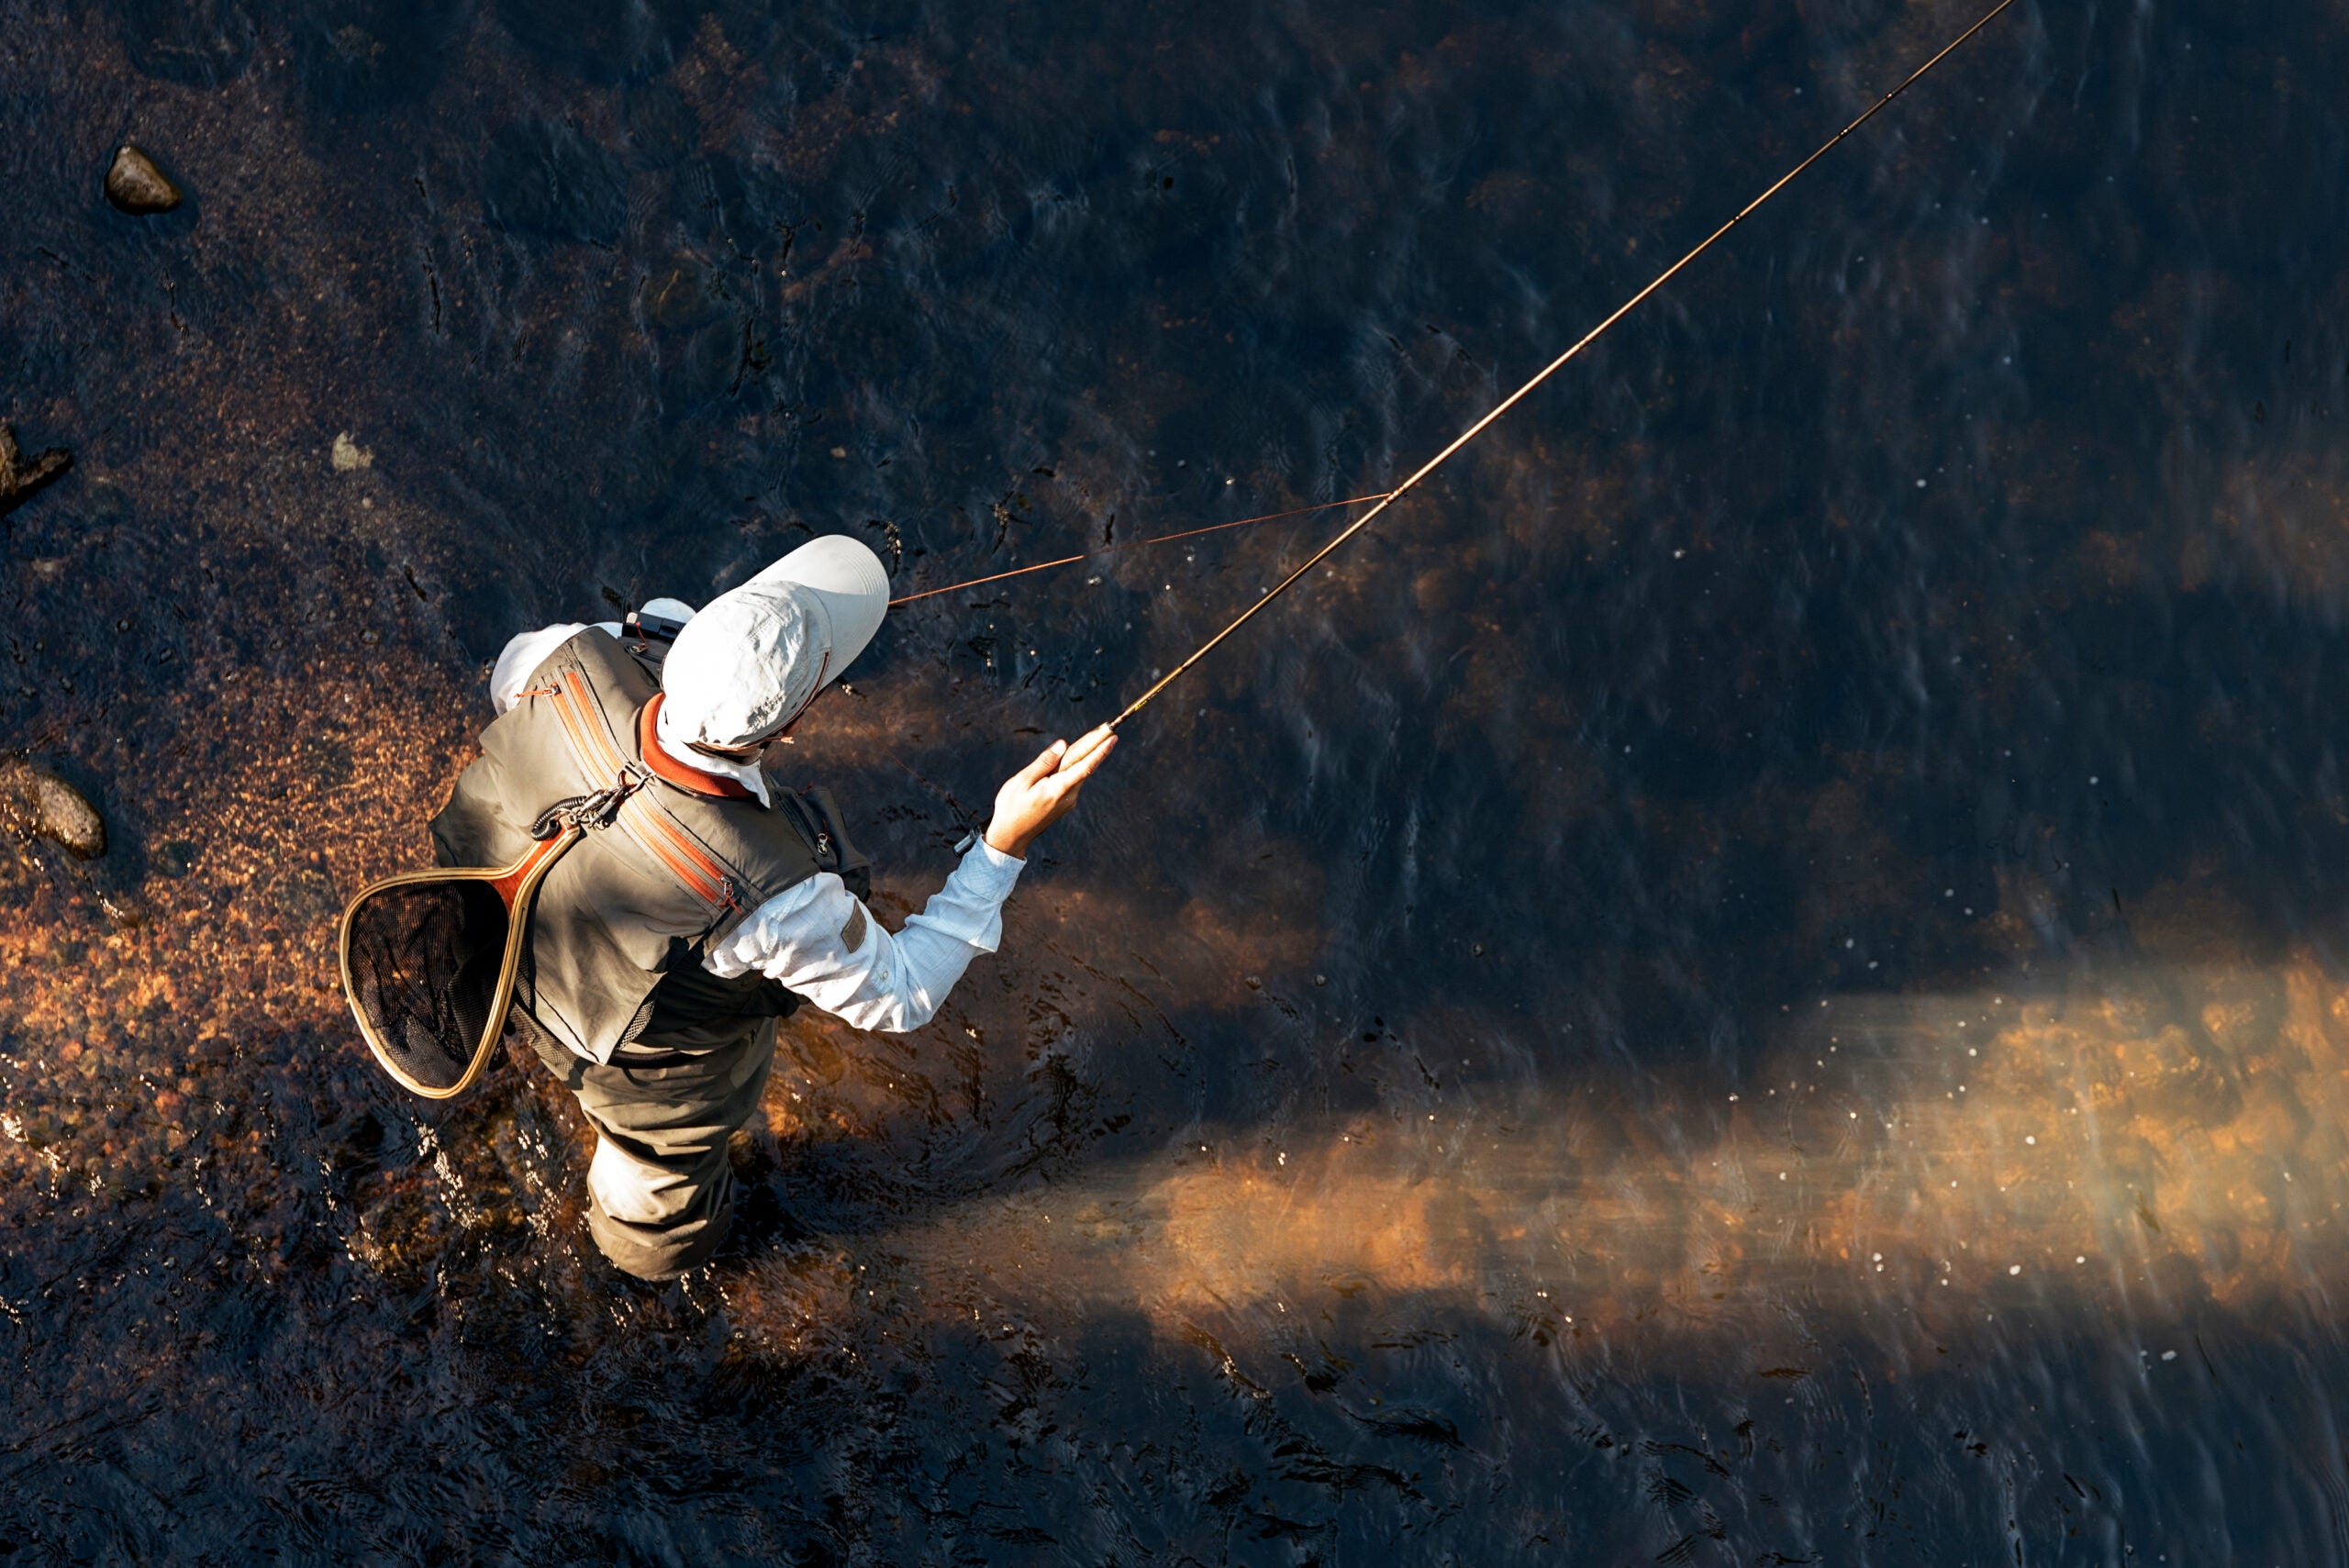 Fly fisherman casts a fly rod in a stream